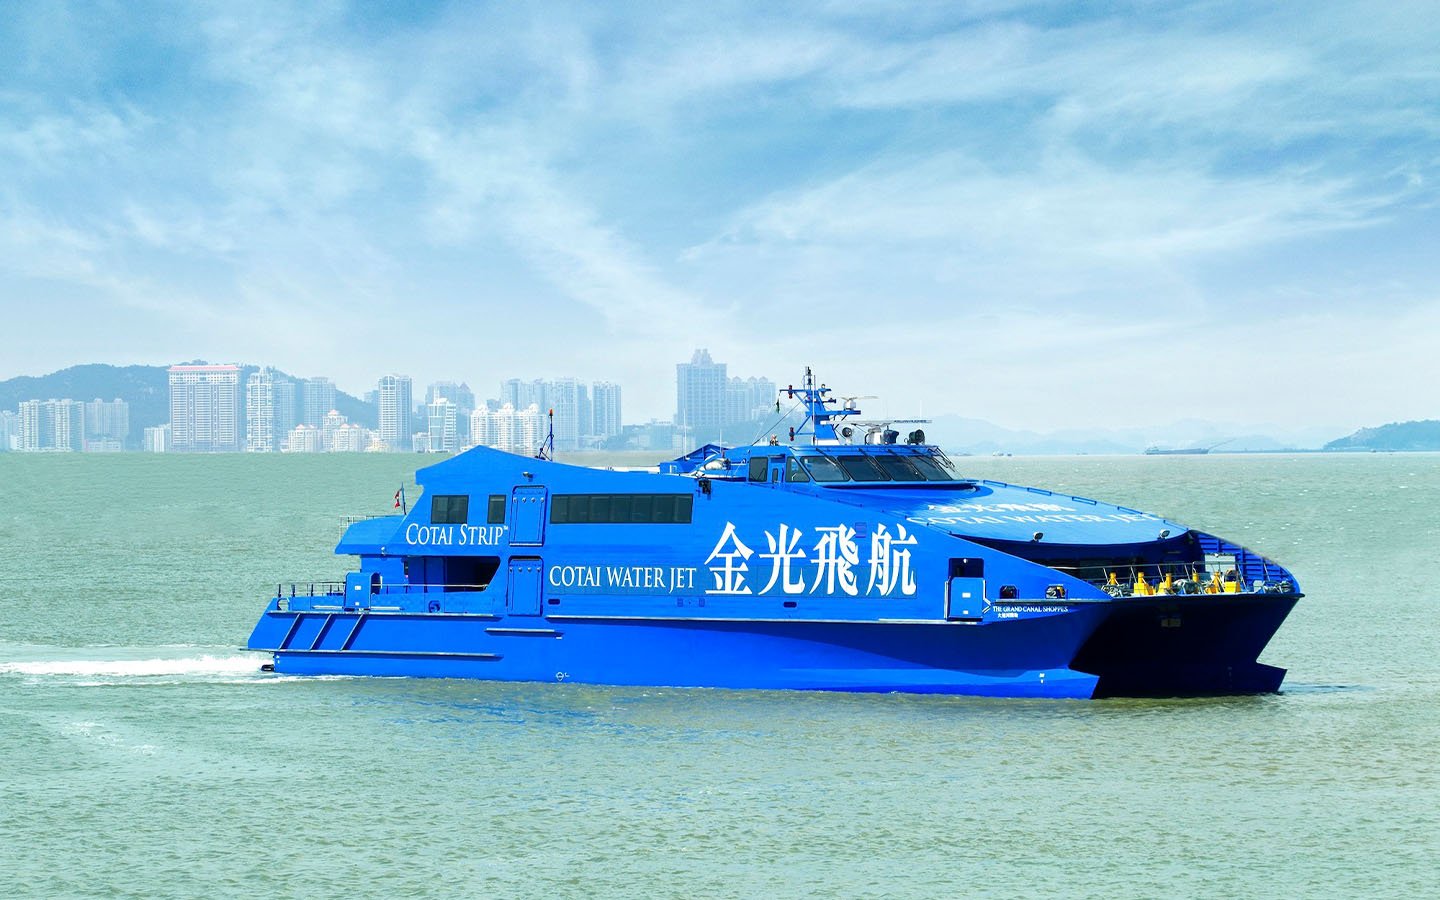 Cotai Water Jet is introducing two sightseeing cruises in local waters